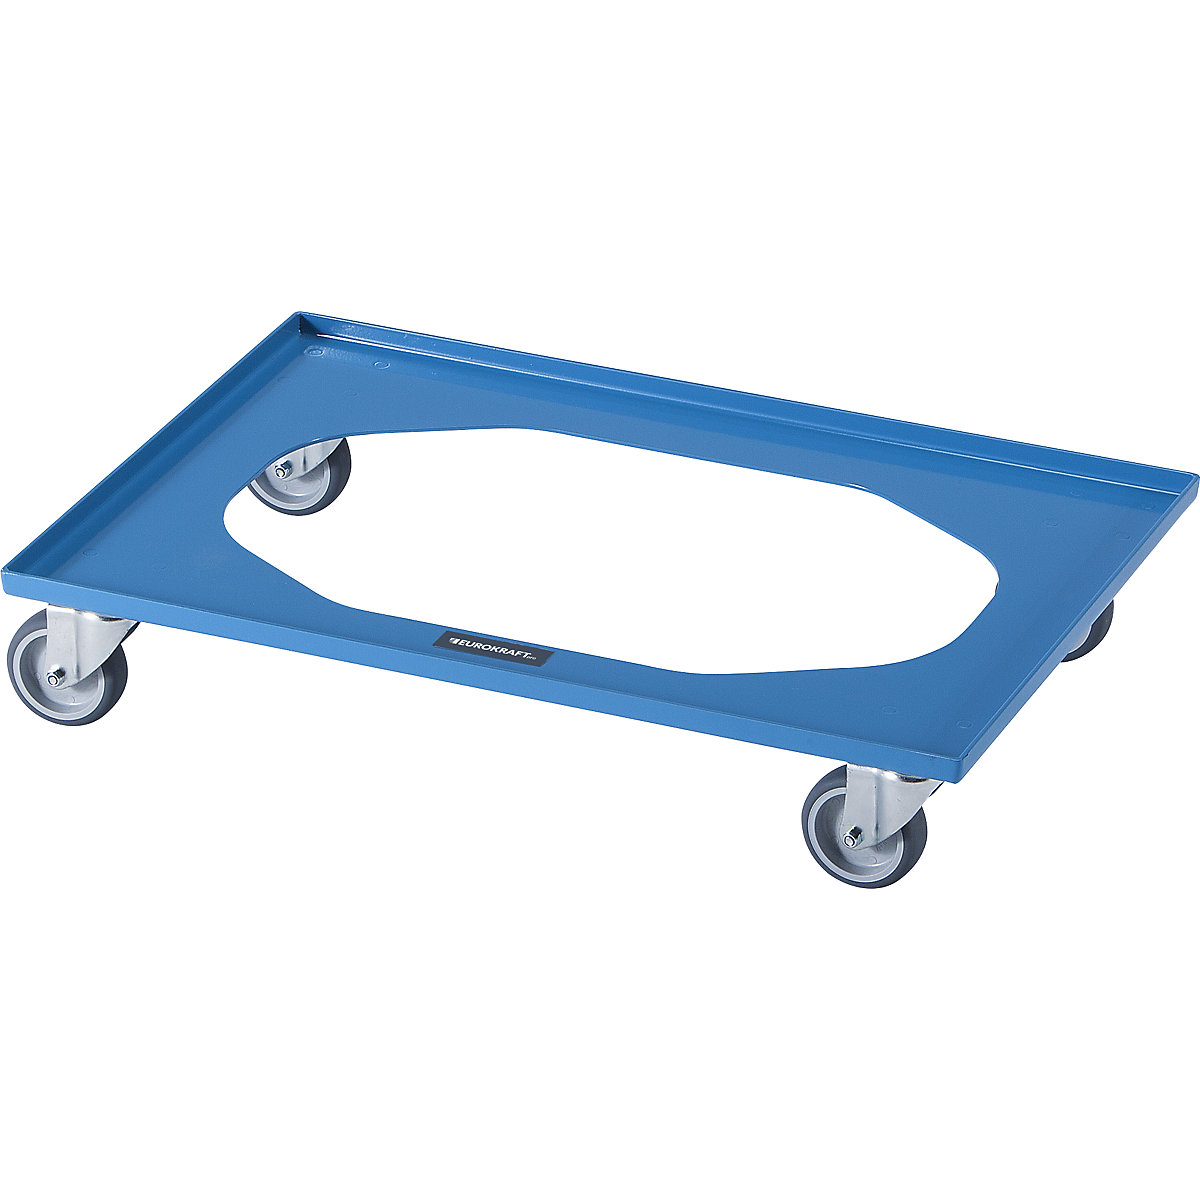 NEO transport dolly – eurokraft pro, for Euro formats 600 x 400 mm, max. load 250 kg, 5+ items-16